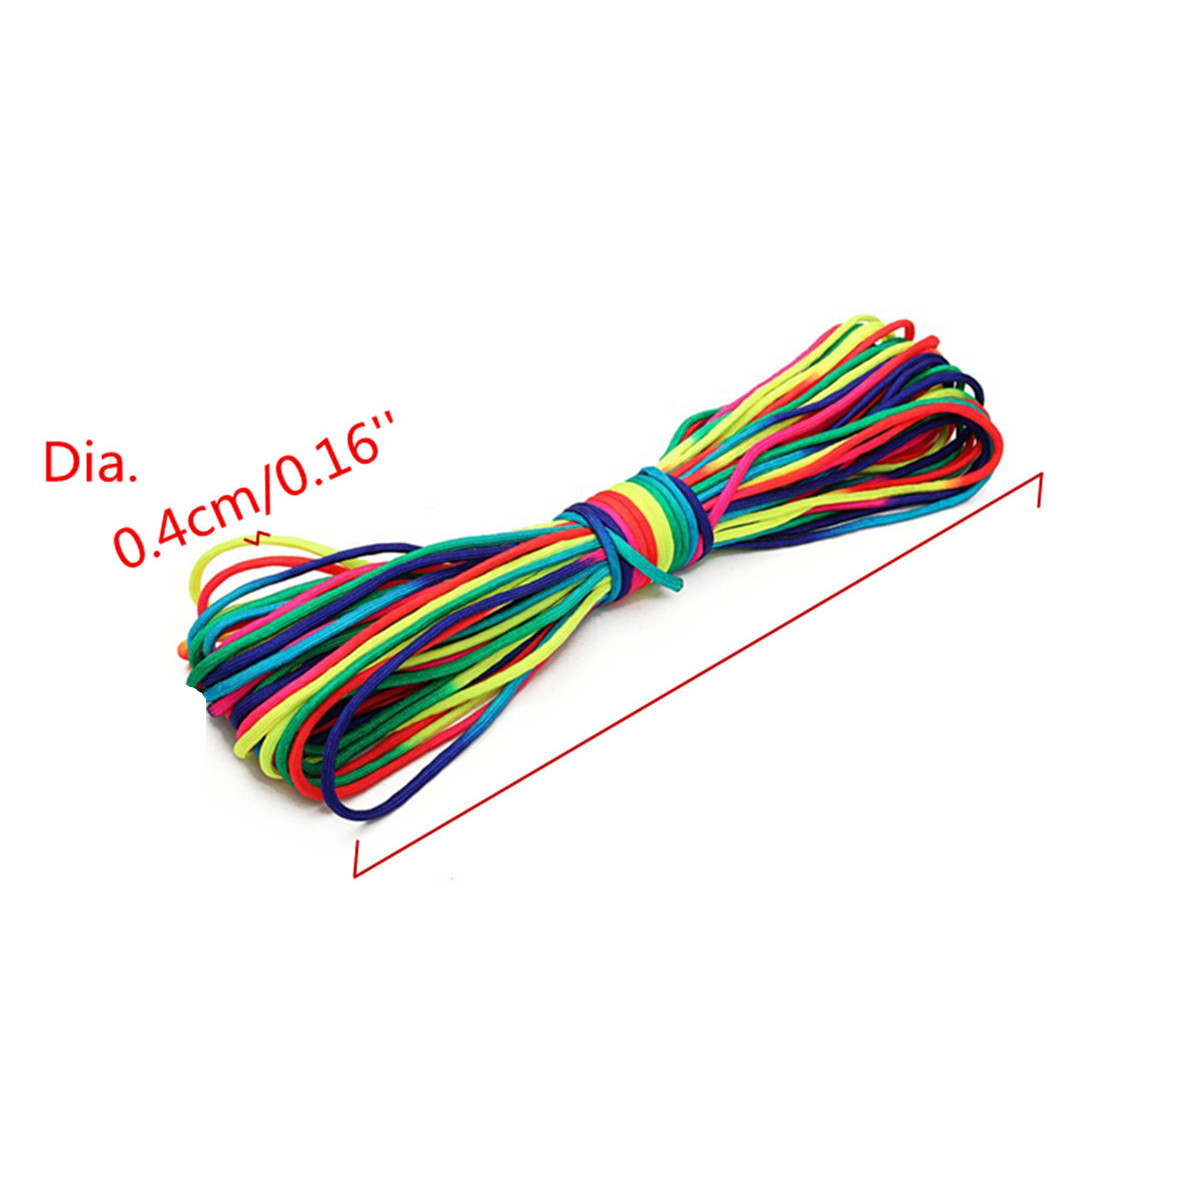 200ft-Rainbow-Color-Paracord-Rope-7-Strand-Parachute-Cord-Camping-Hiking-EDC-Rope-1332795